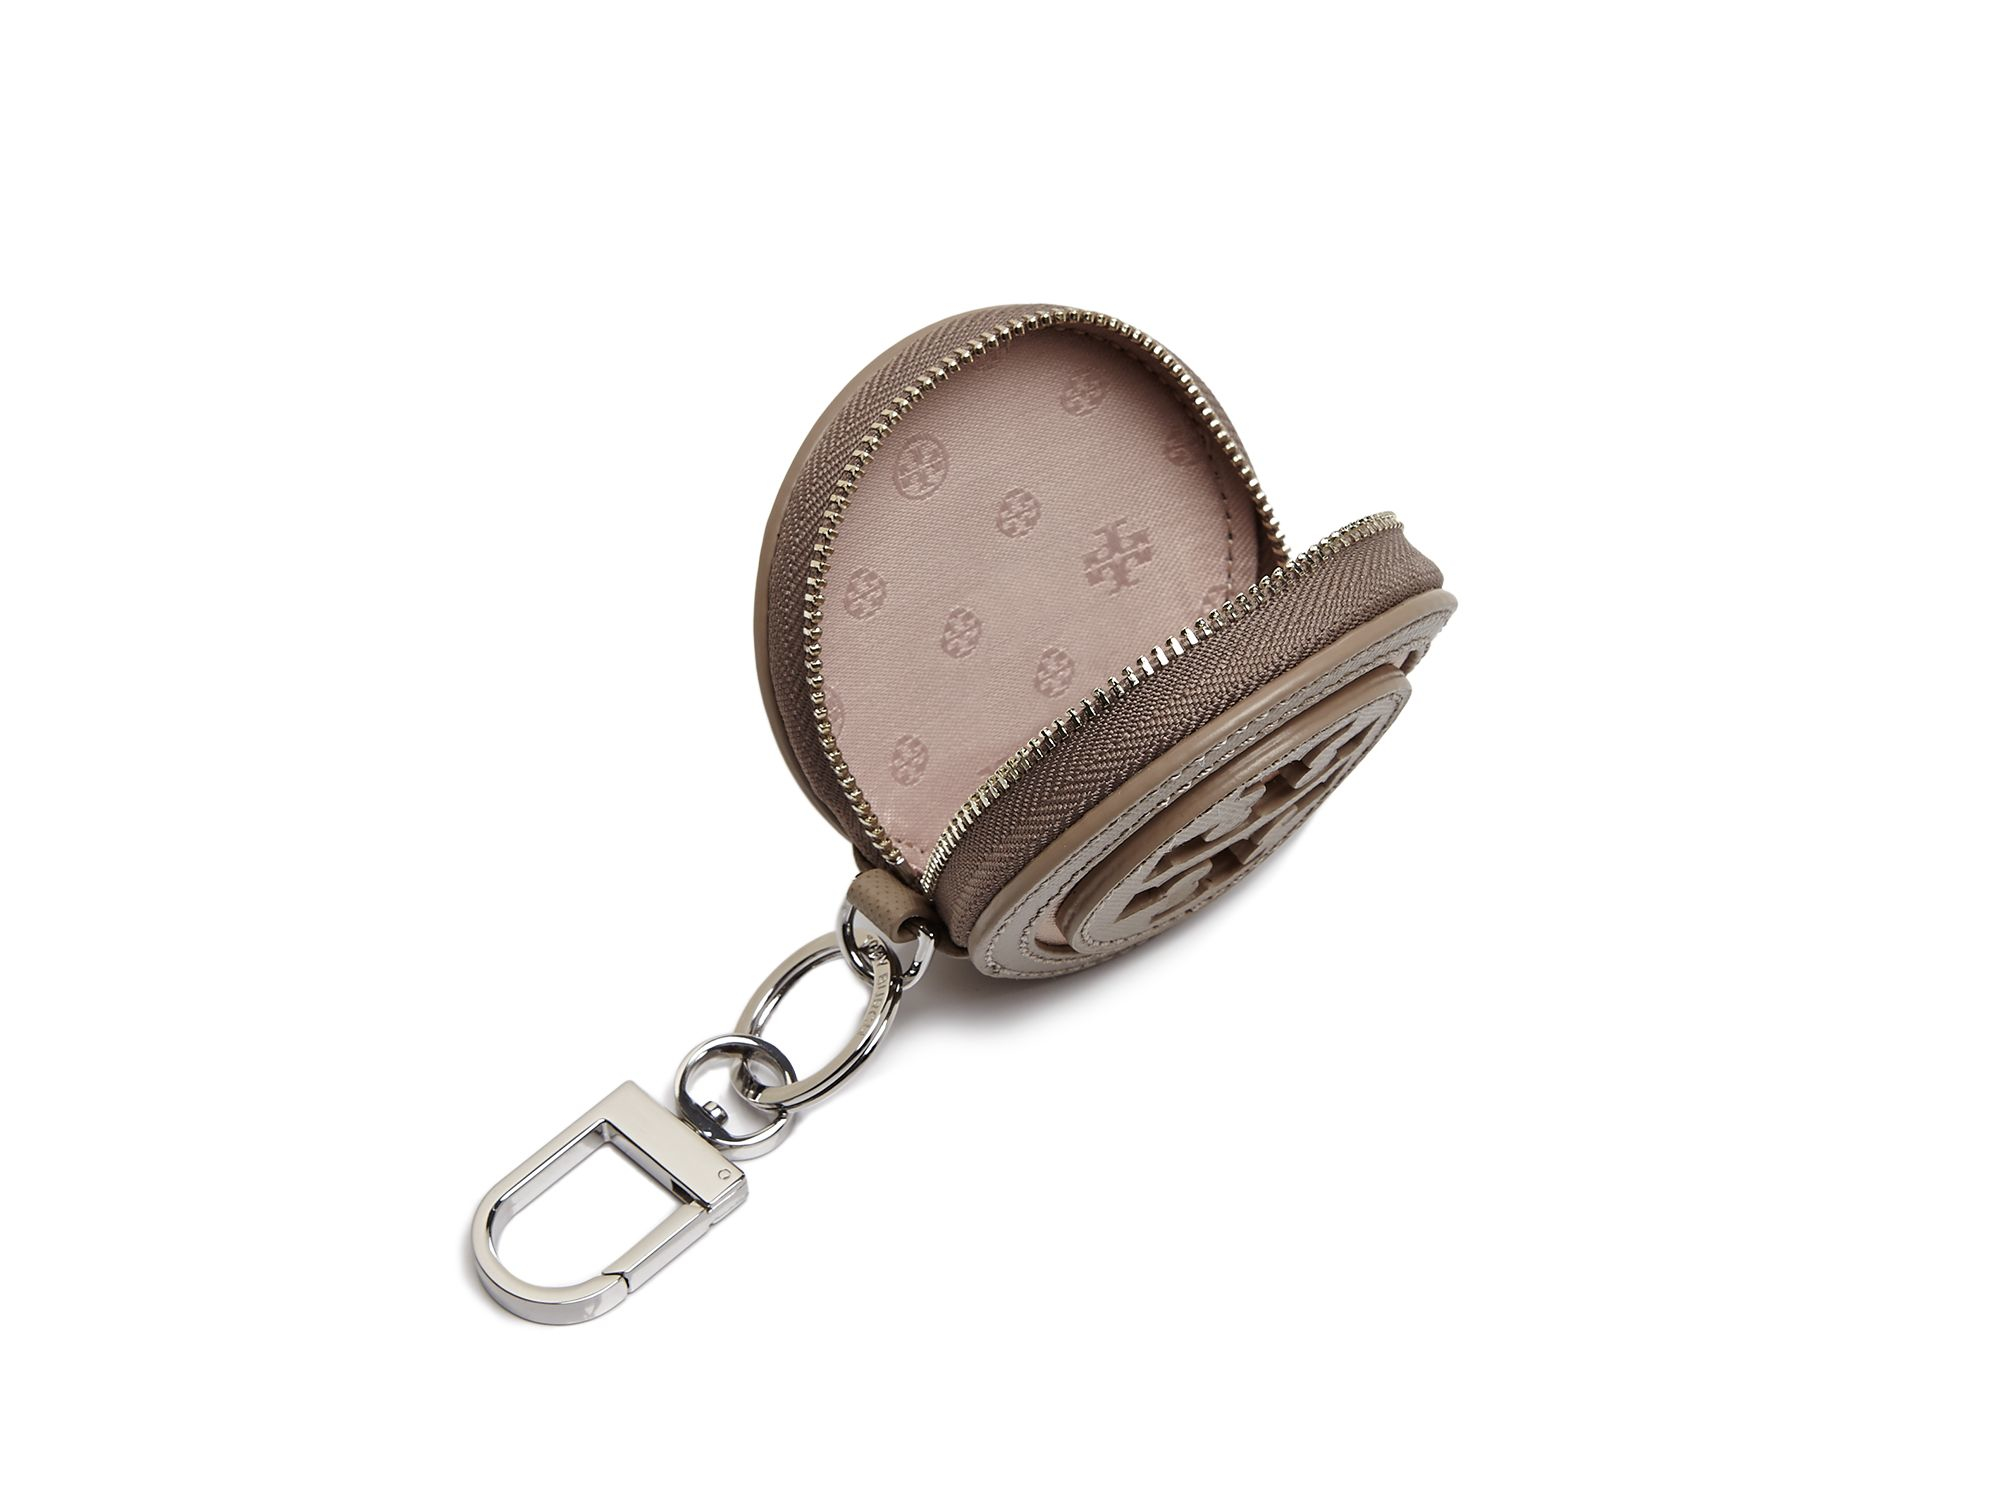 Tory Burch Coin Purse Keychain Outlet Online, Save 40% 